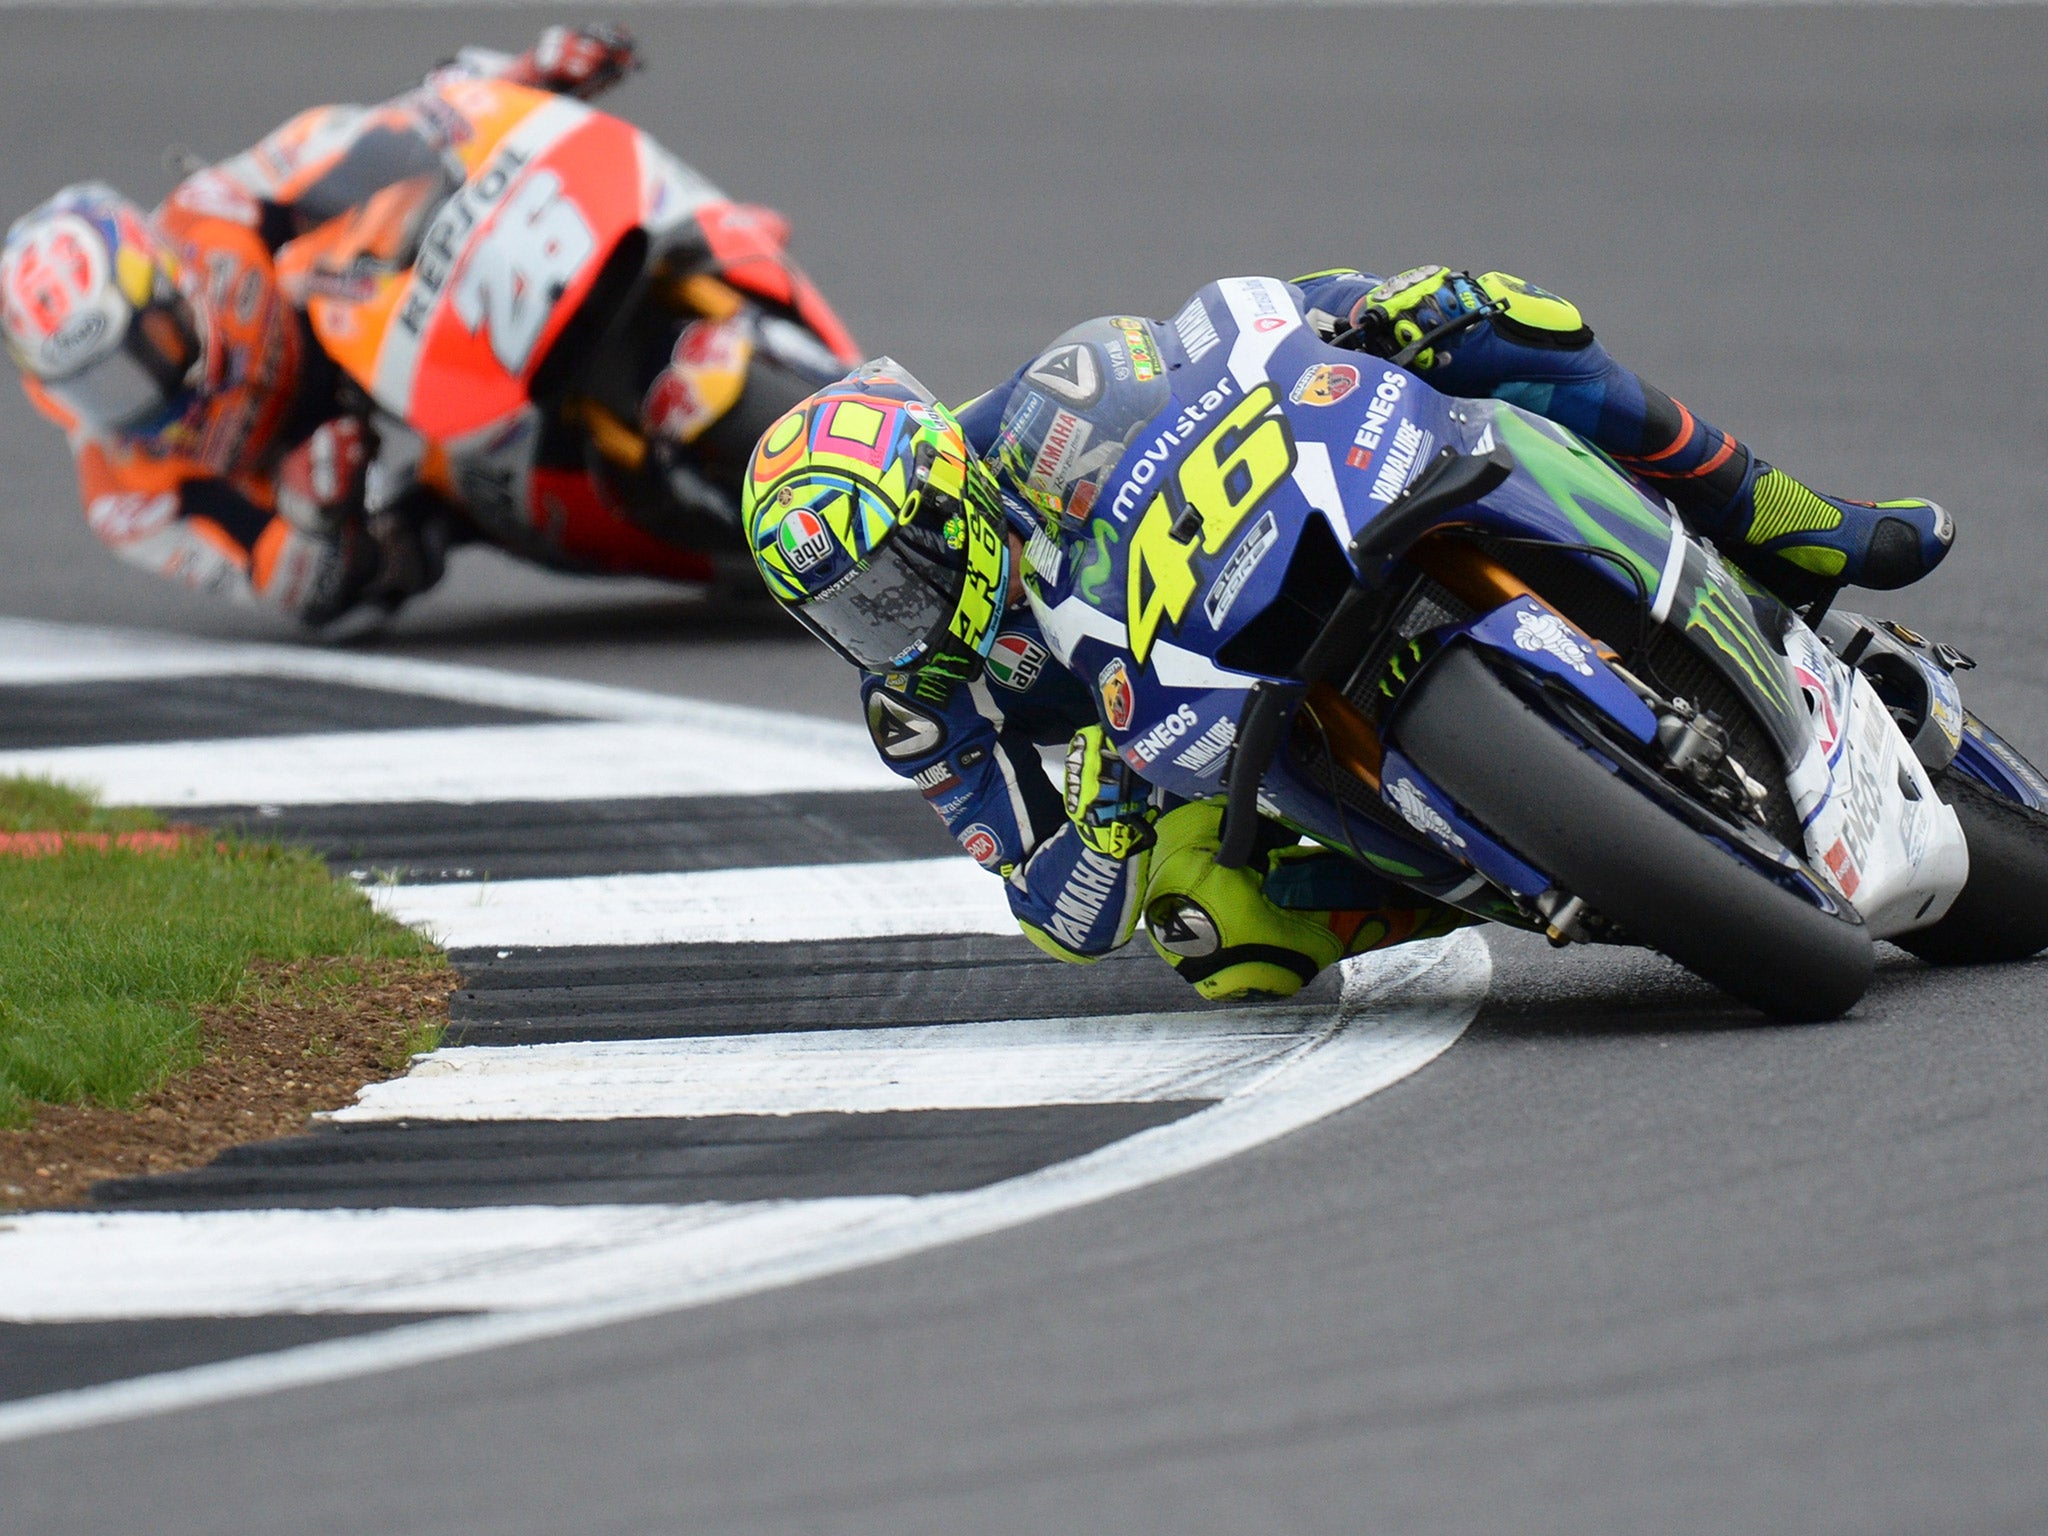 Rossi and Marquez battled for a number of laps in a renewal of their rivalry